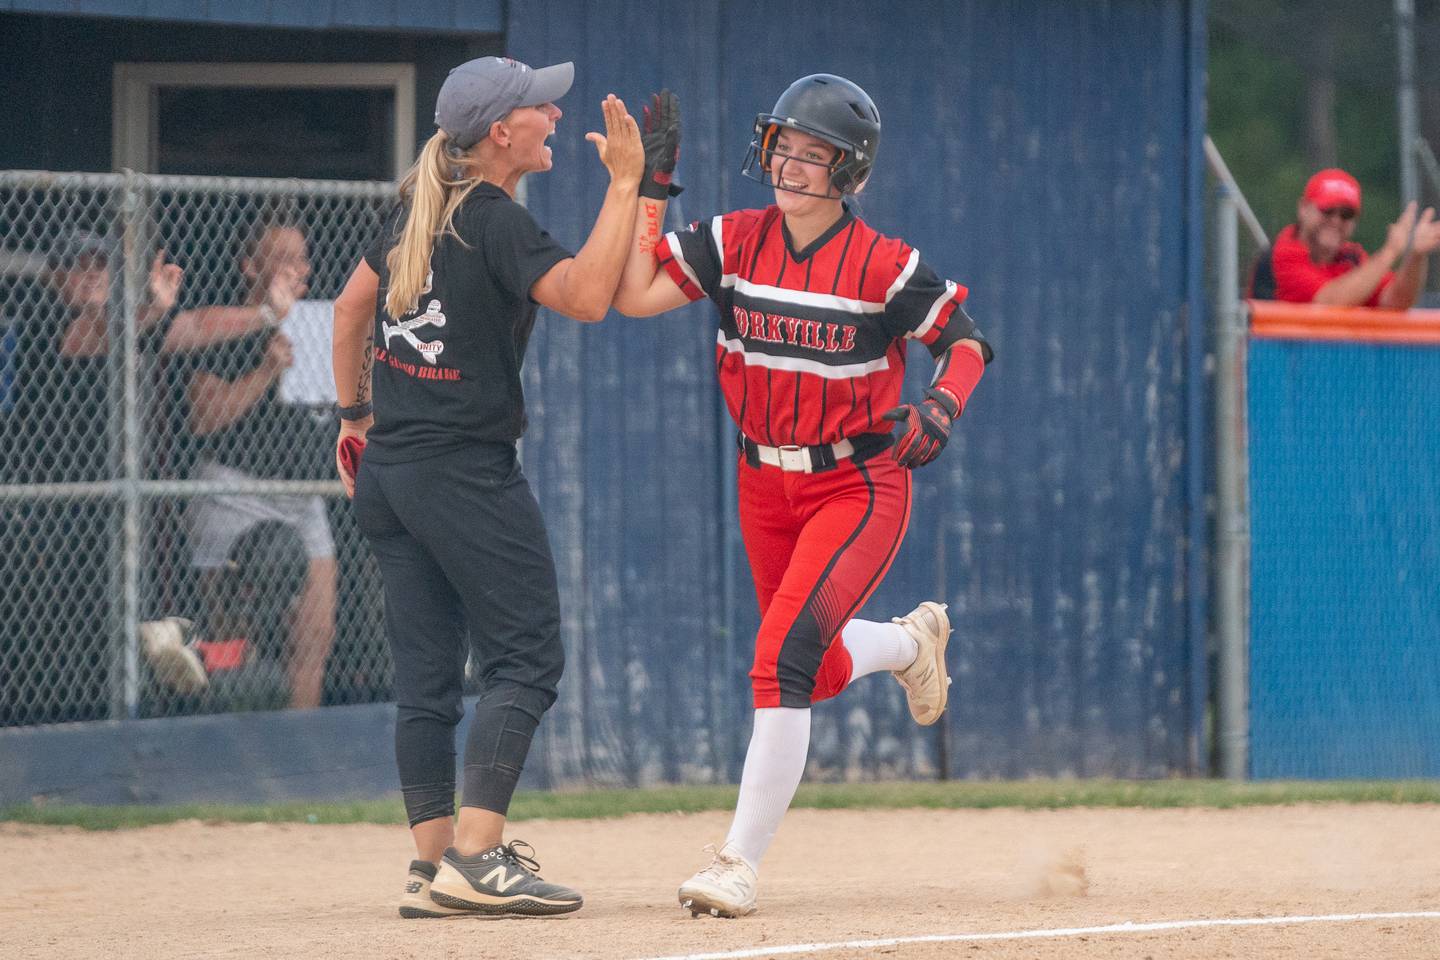 Yorkville's Kaitlyn Roberts (8) rounds third base and gives head coach Jory Regnier a high five after homering against Oswego East during the Class 4A Oswego softball sectional semifinal game between Yorkville and Oswego East at Oswego High School on Tuesday, May 30, 2023.